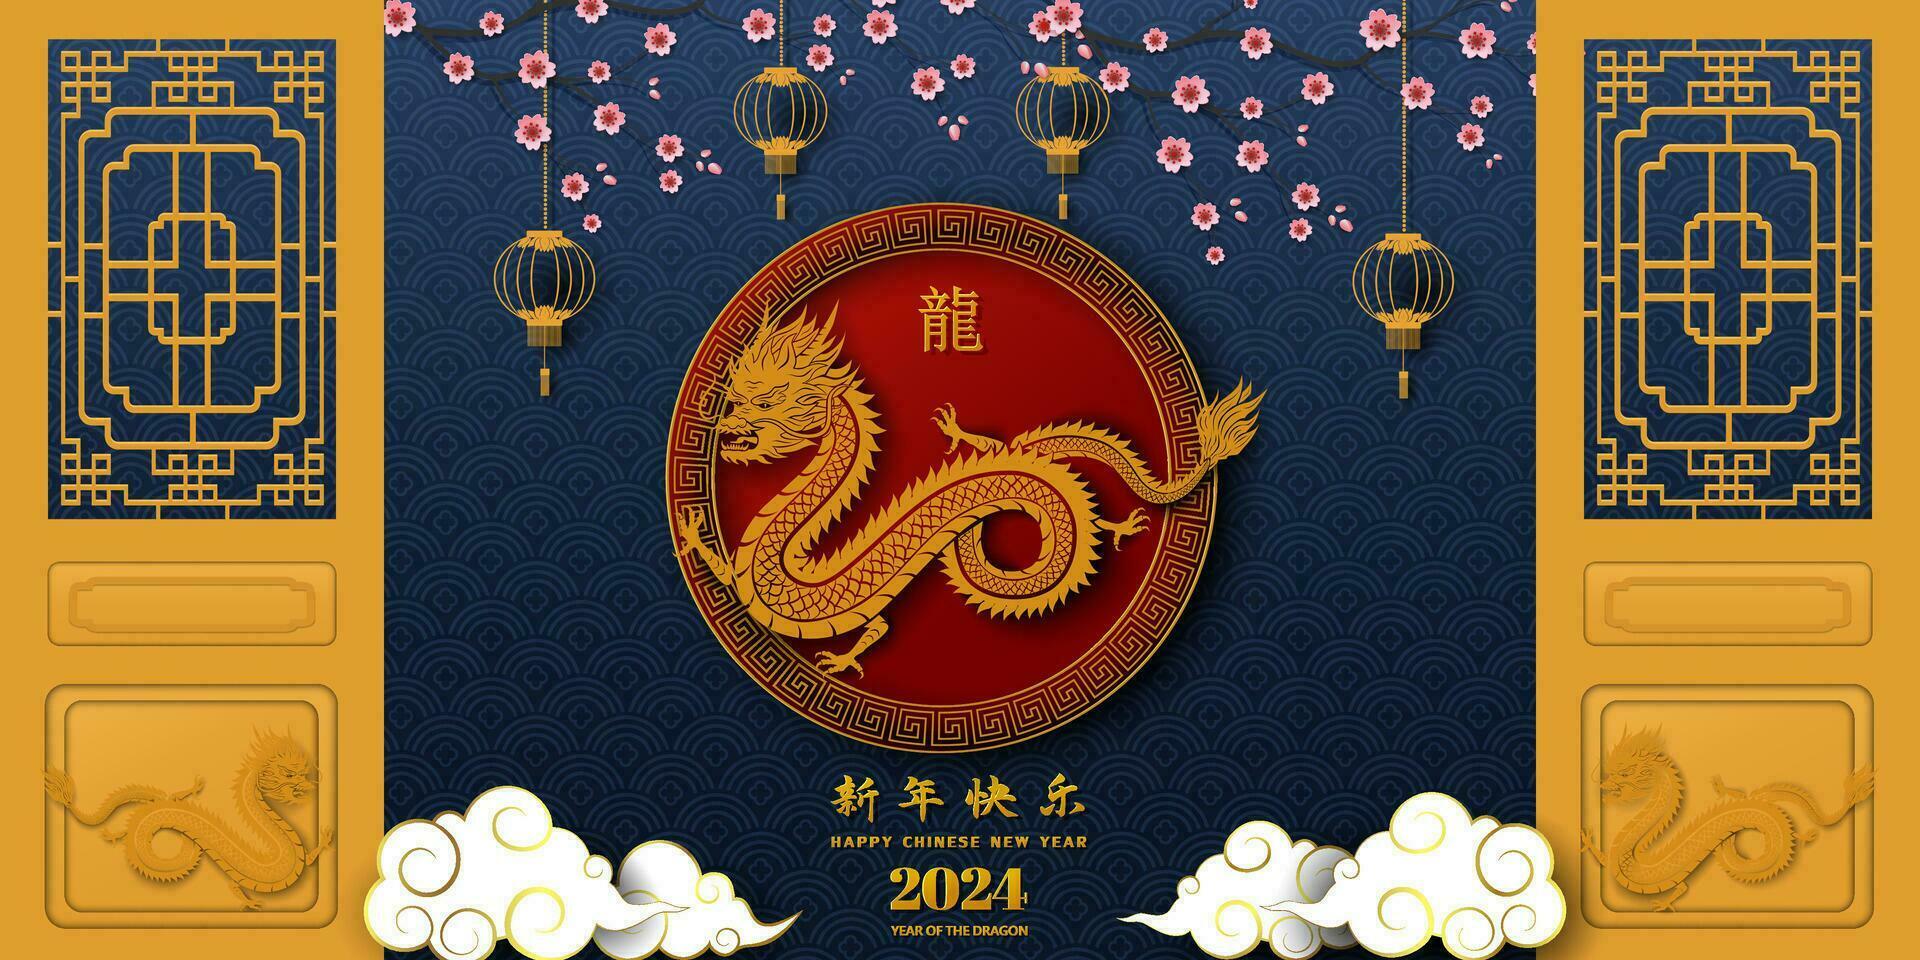 Happy Chinese new year 2024,zodiac sign for the year of dragon on asian style,Chinese translate mean happy new year 2024,dragon year vector